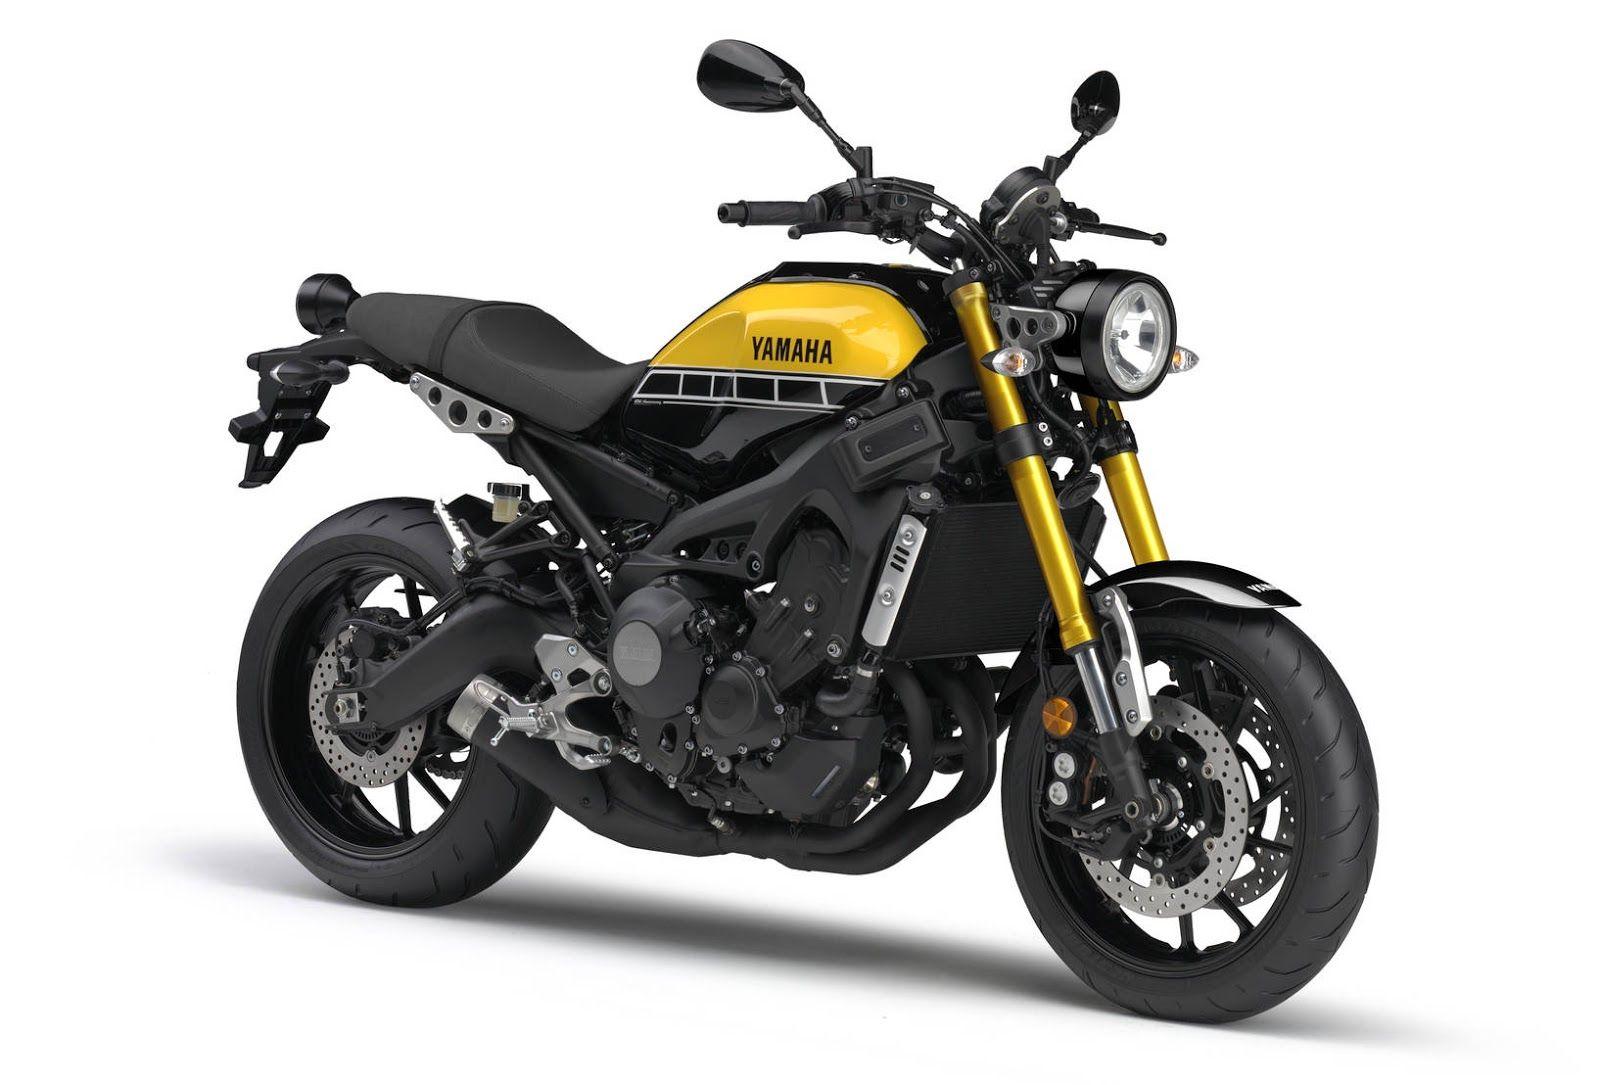 Upcoming 2016 Yamaha XSR900 HD Picture Latest New & Old Car